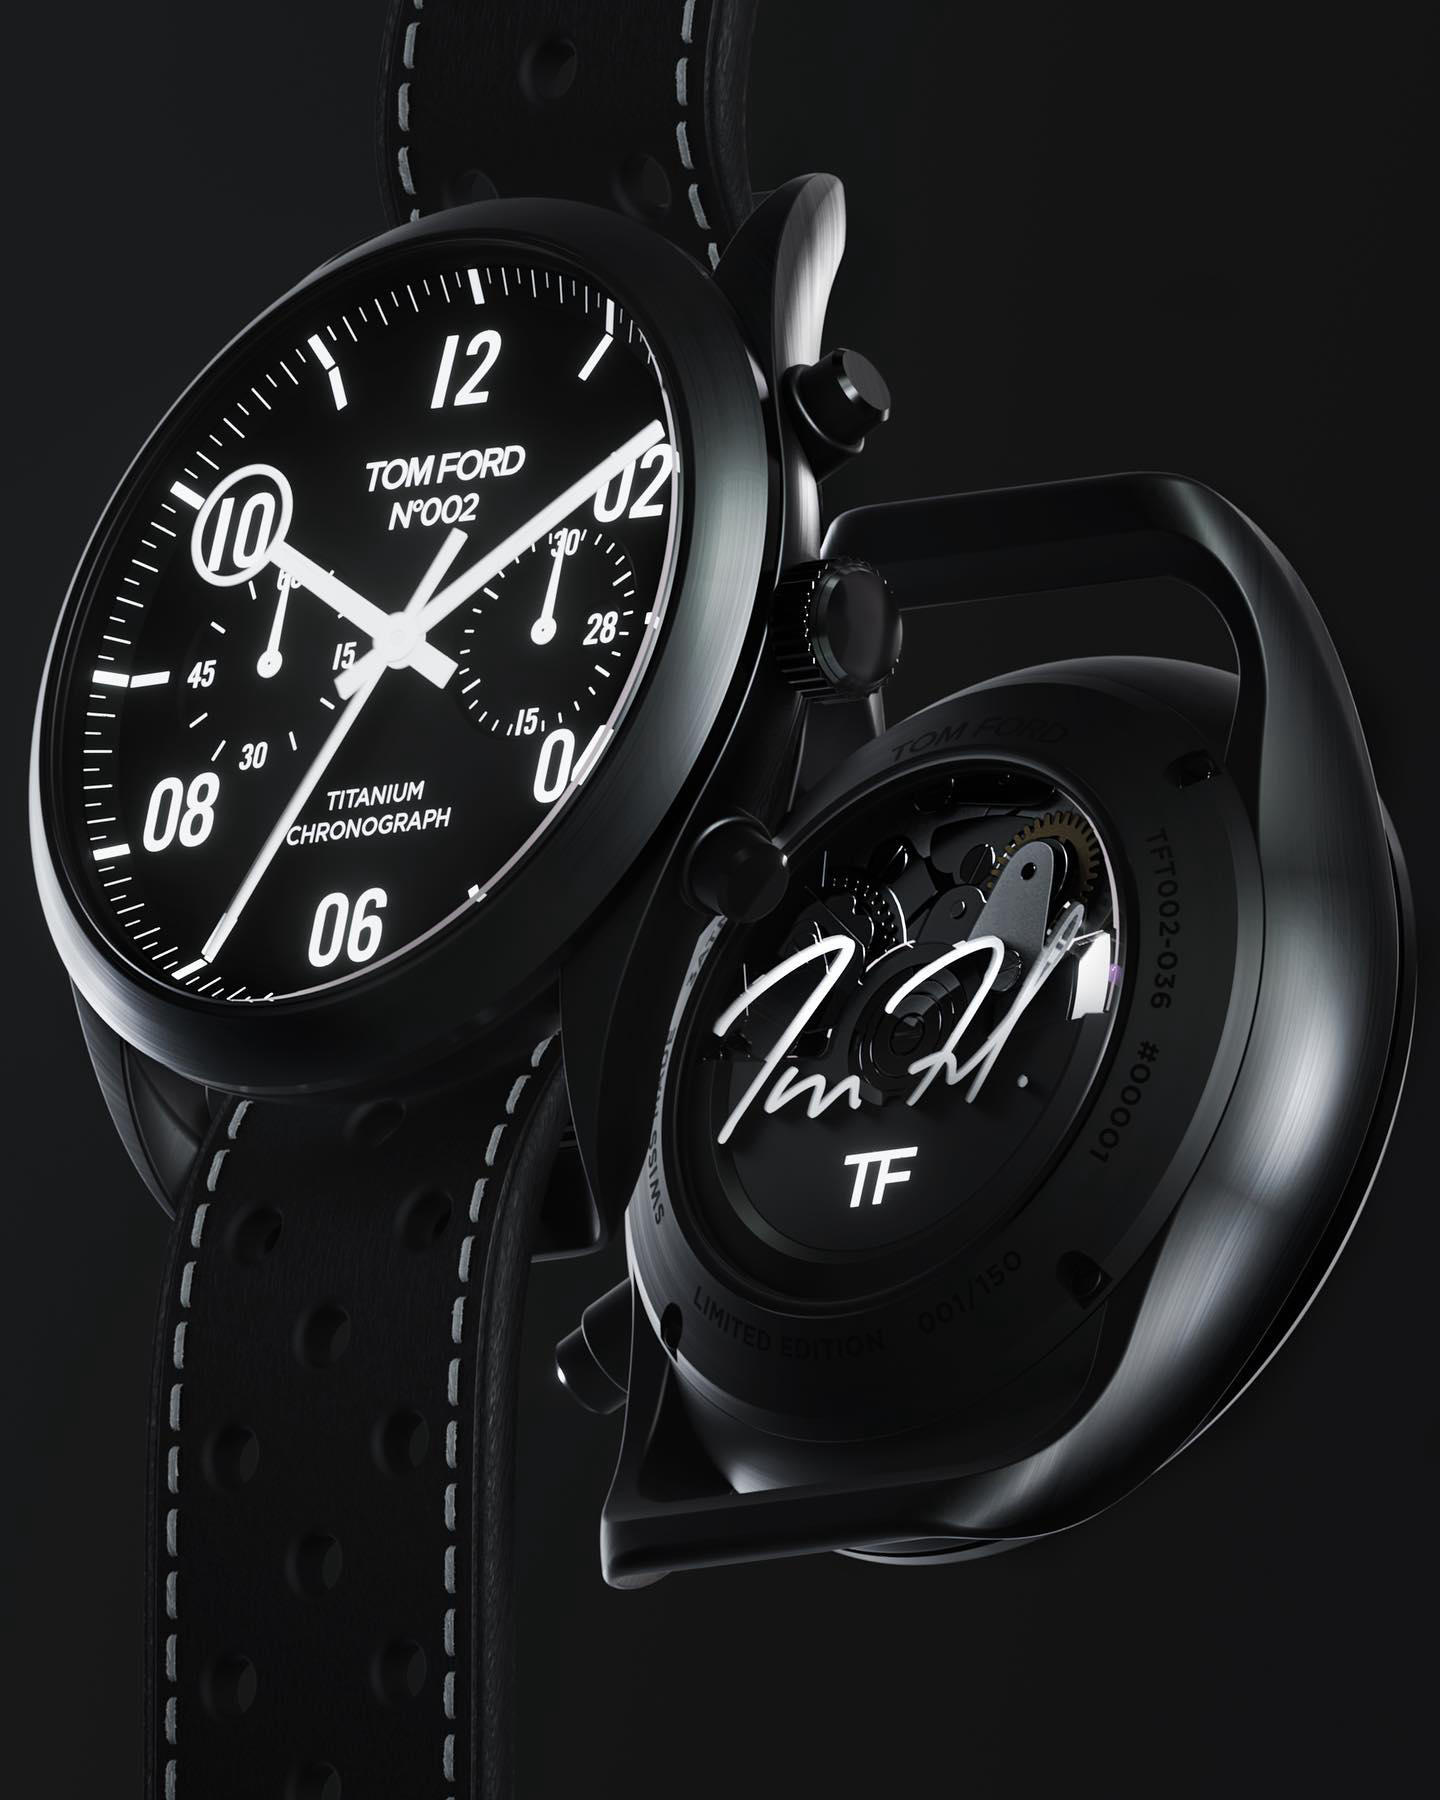 image  1 TOM FORD - INTRODUCING THE 002 LIMITED-EDITION CHRONOGRAPH TIMEPIECE